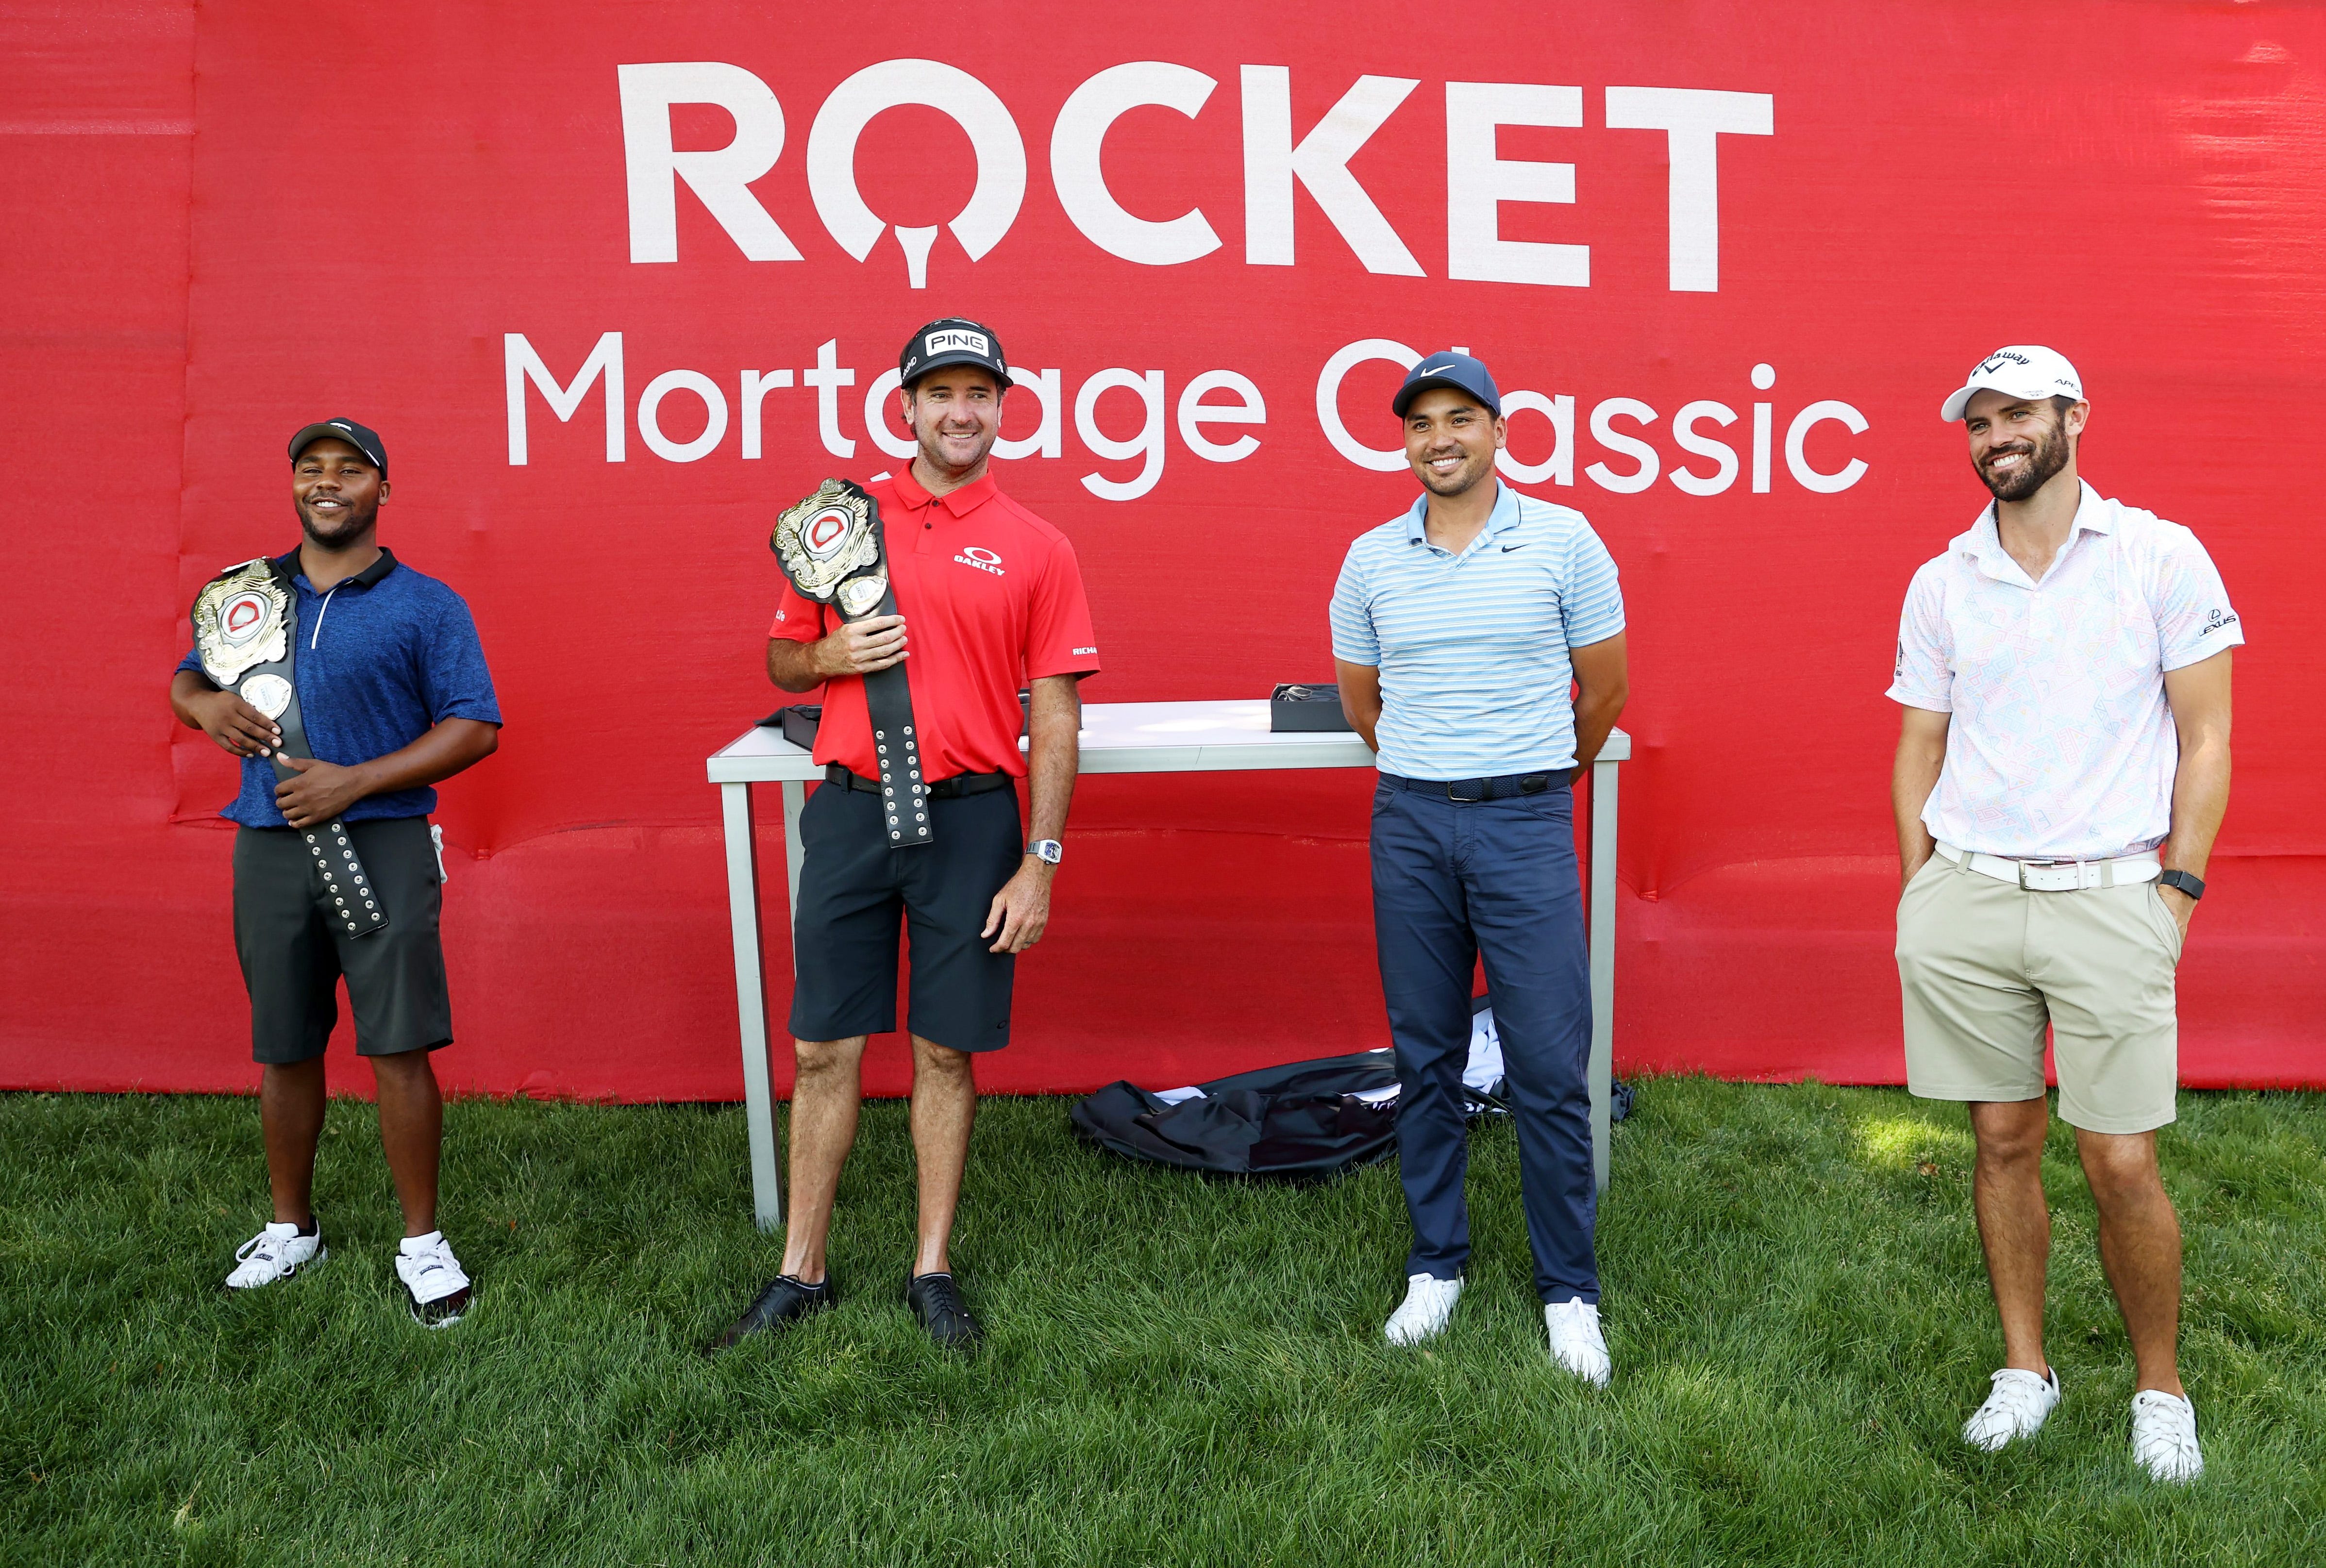 From left, Harold Varner III, Bubba Watson, Jason Day and Wesley Bryan after their charity match at Detroit Golf Club in 2020.